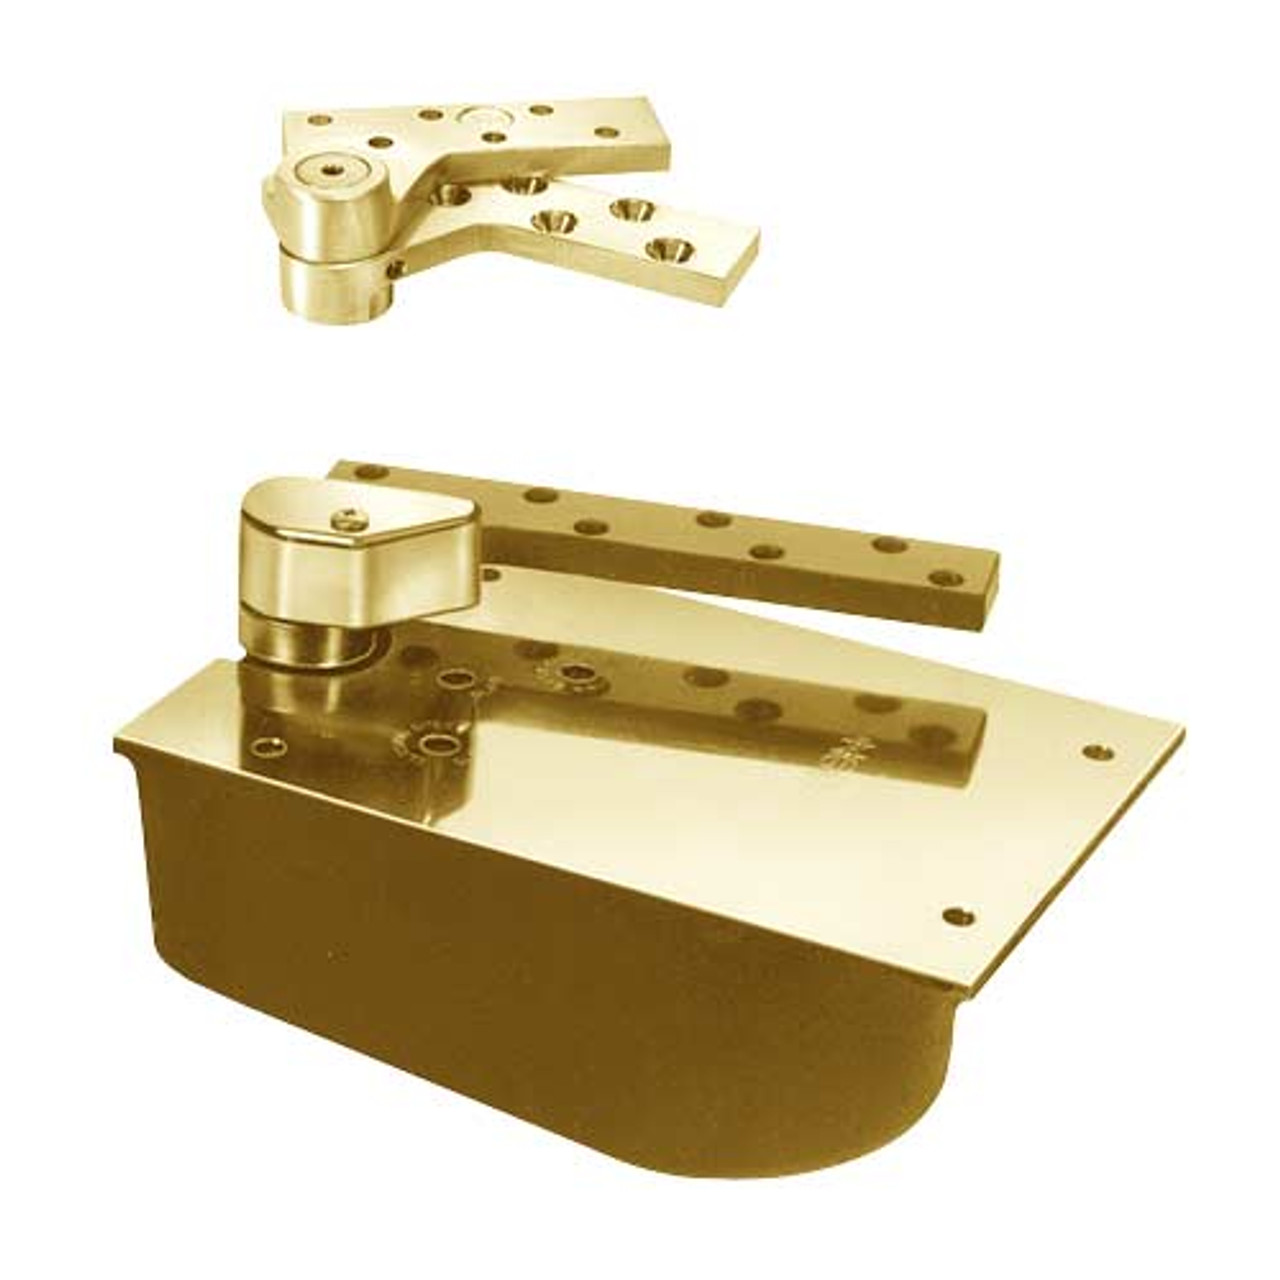 L27-90S-LFP-CWF-LH-2-1/4-605 Rixson 27 Series Extra Heavy Duty Lead Lined Offset Floor Closer in Bright Brass Finish